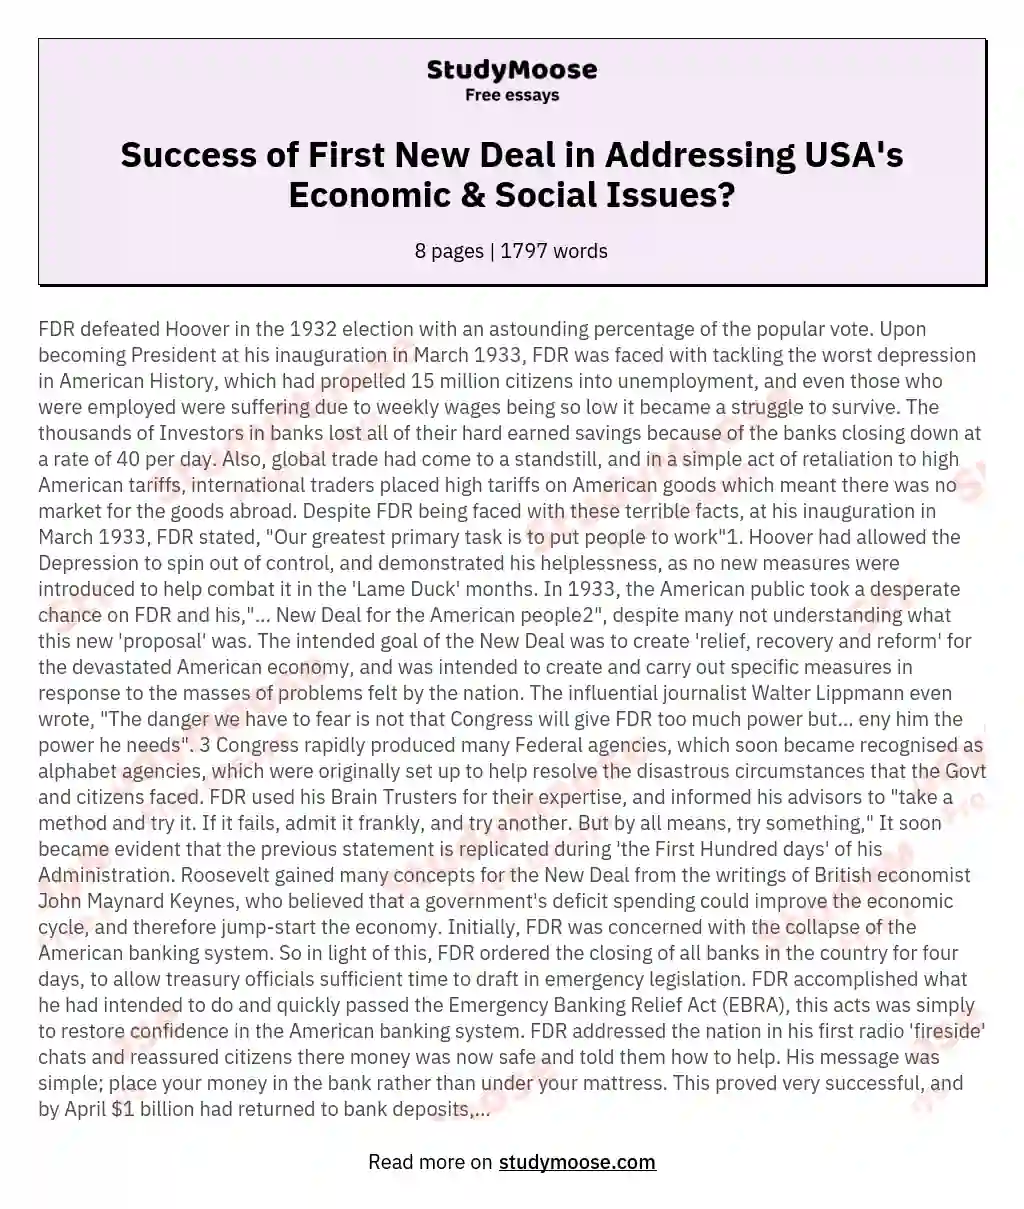 How successful was the First New Deal in tackling the economic and social problems of the USA?